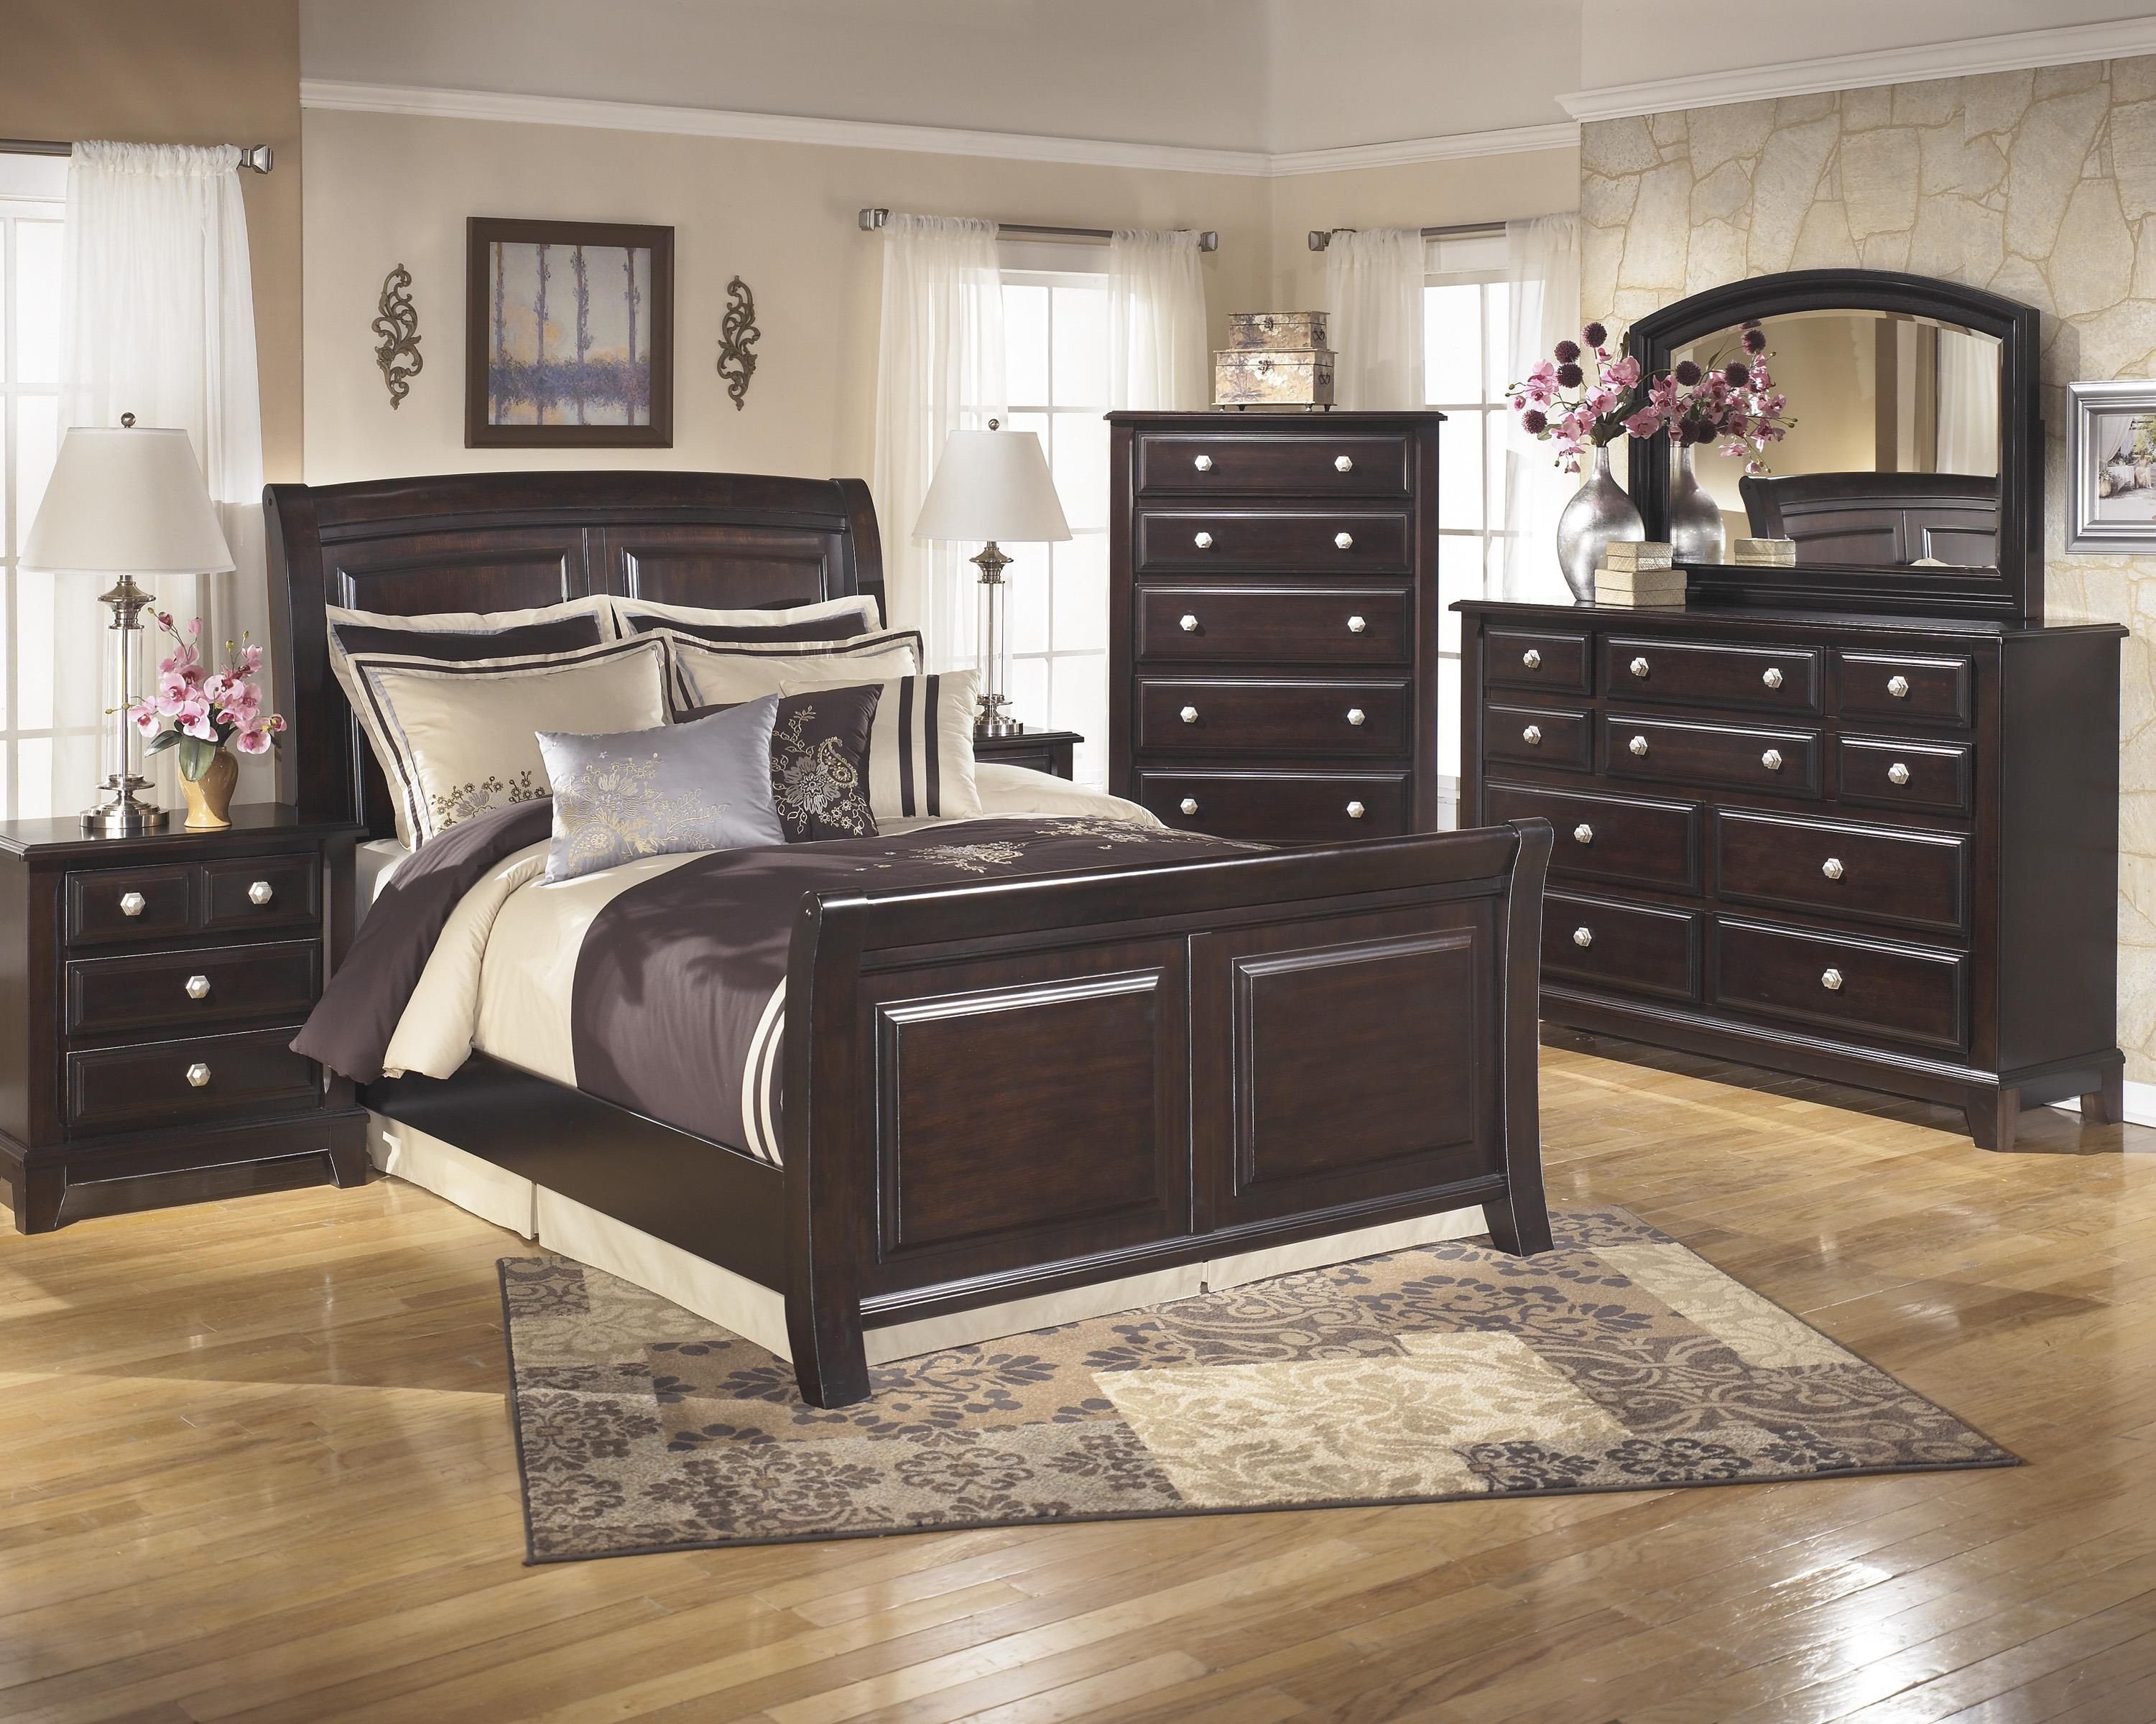 Used King Bedroom Set Awesome Ridgley King Bedroom Group by Signature Design by ashley